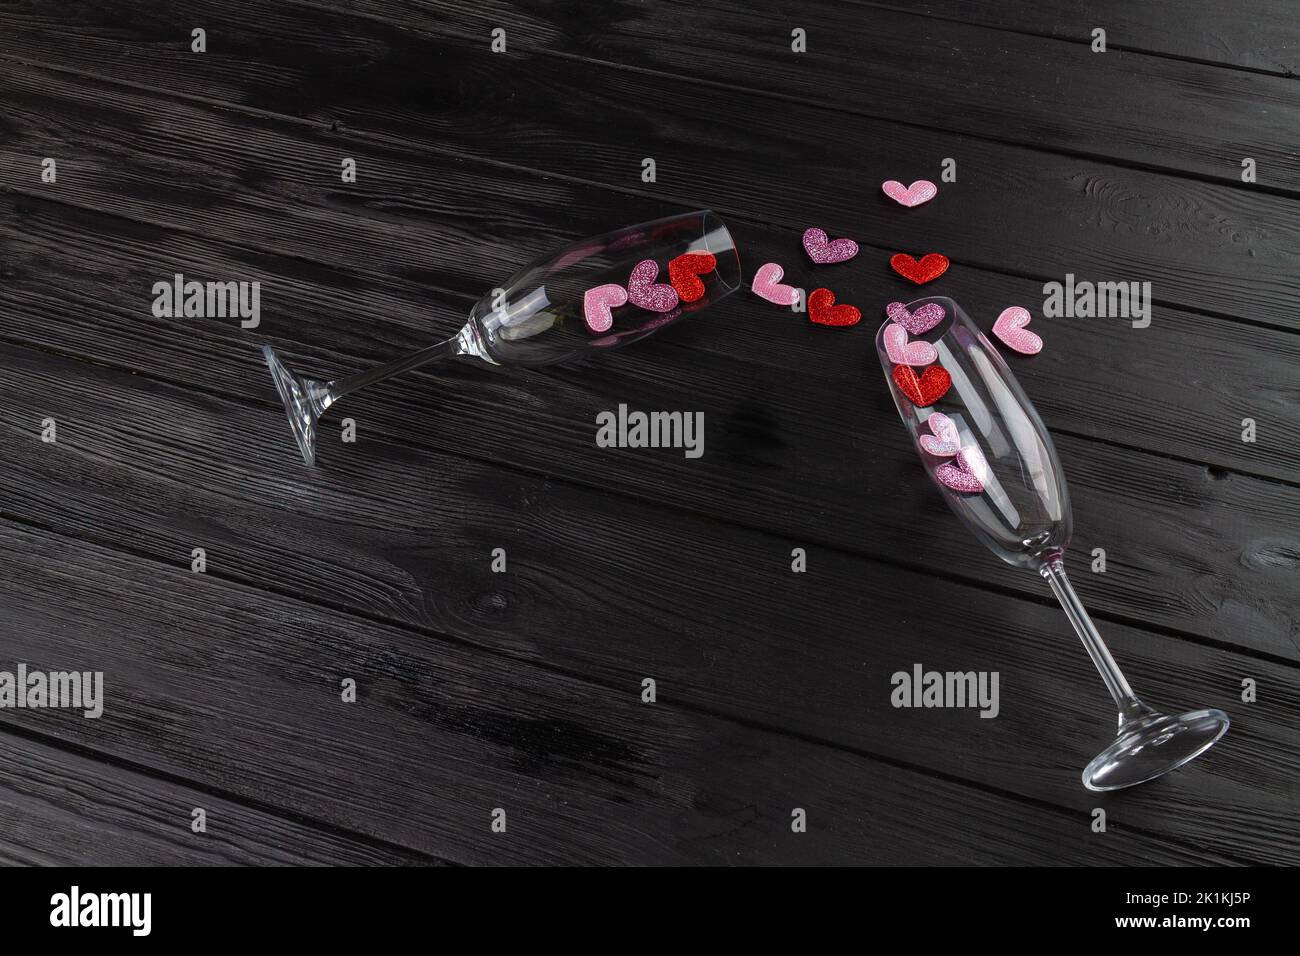 Two champagne glasses with spilled sequin hearts. Black wooden desk. Happy valentines day flat lay. Stock Photo